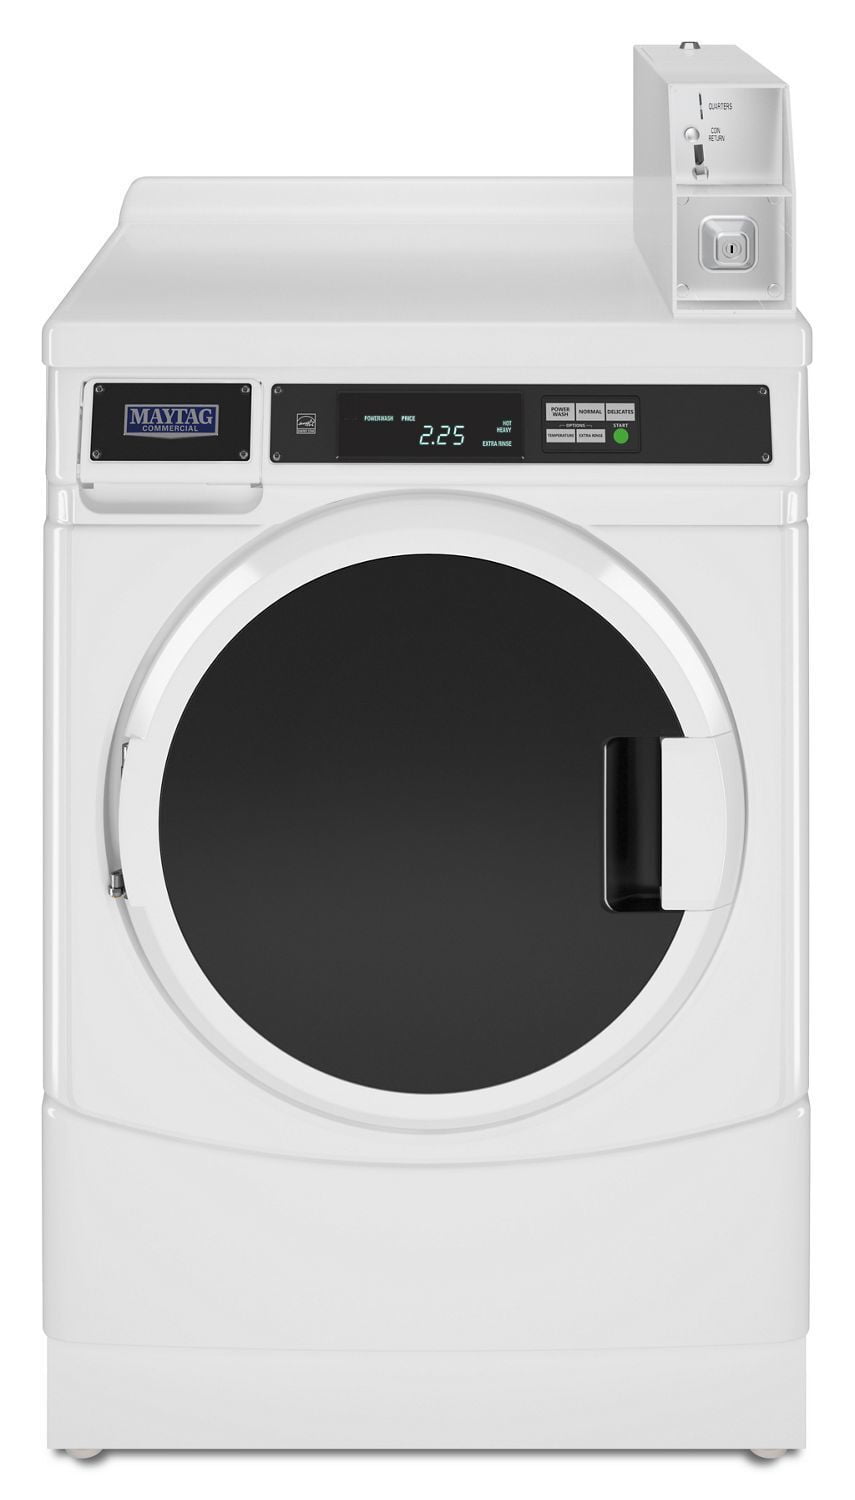 Whirlpool CHW9160GW 27" Commercial High-Efficiency Energy Star-Qualified Front-Load Washer, Non-Vend White